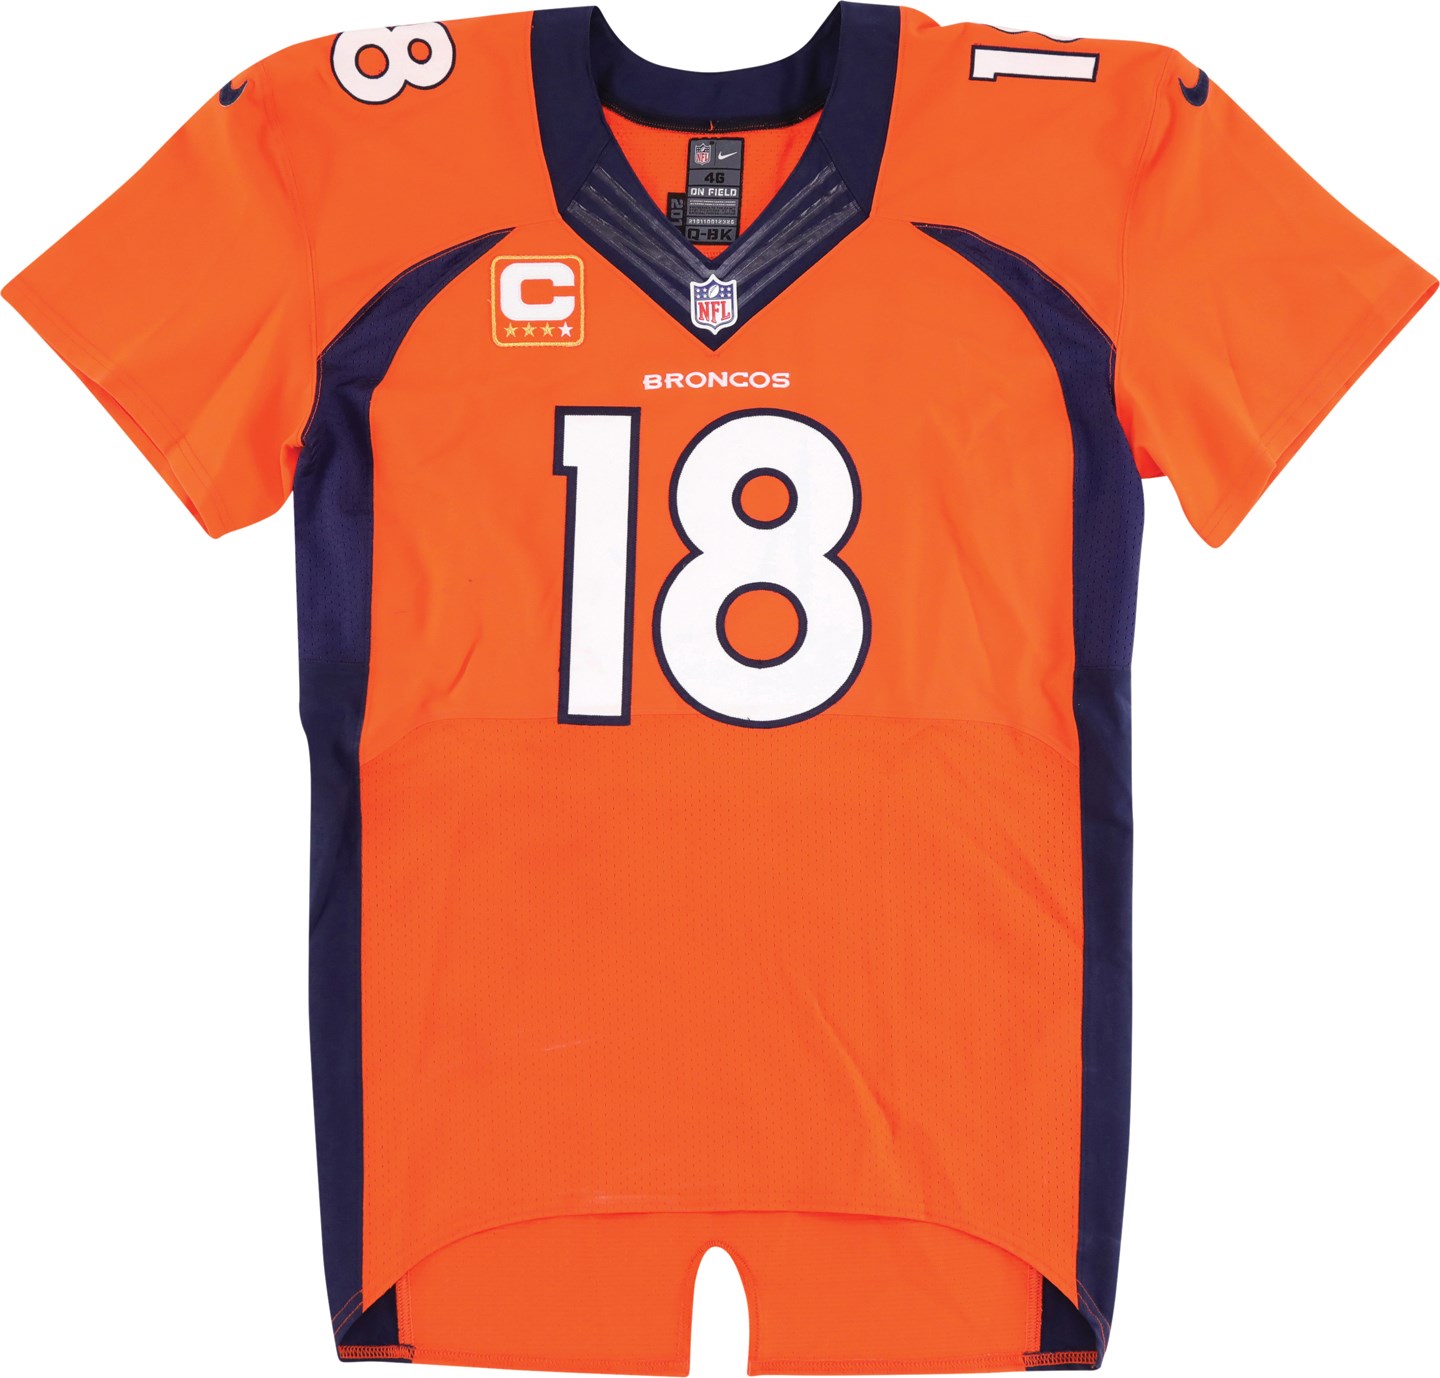 - storic 9/7/14 Peyton Manning Denver Broncos Game Worn Jersey - Surpasses 65,000 Passing Yards and Defeats All 32 NFL Teams (Davious Sports Photo-Matched LOA & Team LOA)